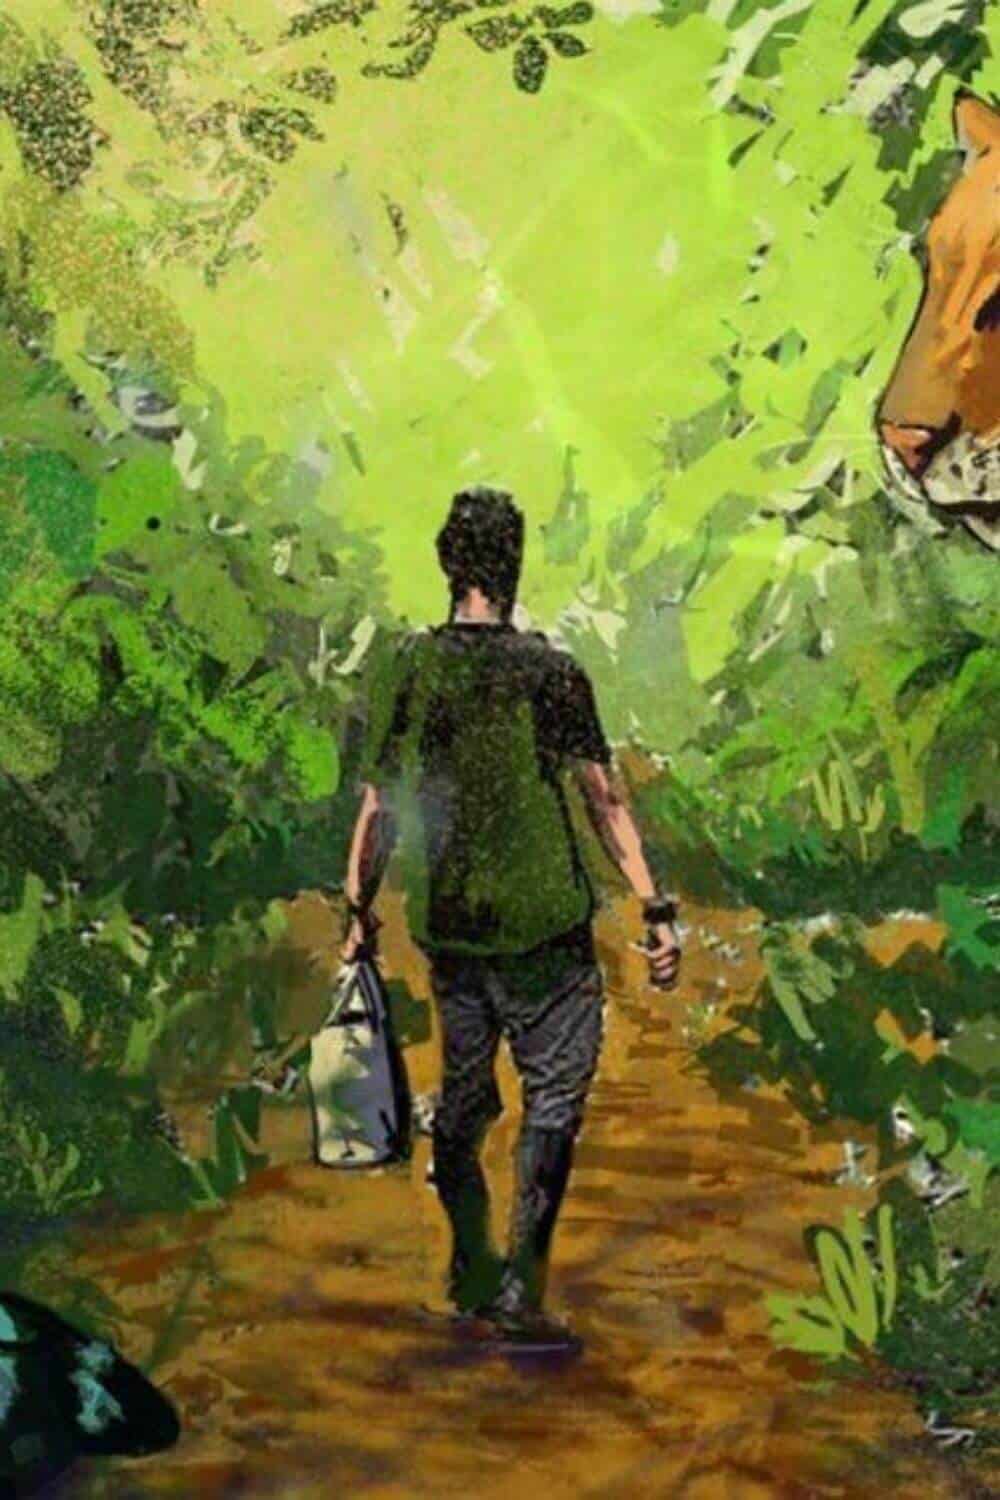 With climate change and biodiversity loss happening at an alarming rate, it’s high time we tune in to conservation issues, what better way than to start subscribing to some inspiring, educational and environmental podcasts out there. Image by Gianluca Cerullo Conservation Uncut Podcast #environmentalpodcasts #sustainablejungle